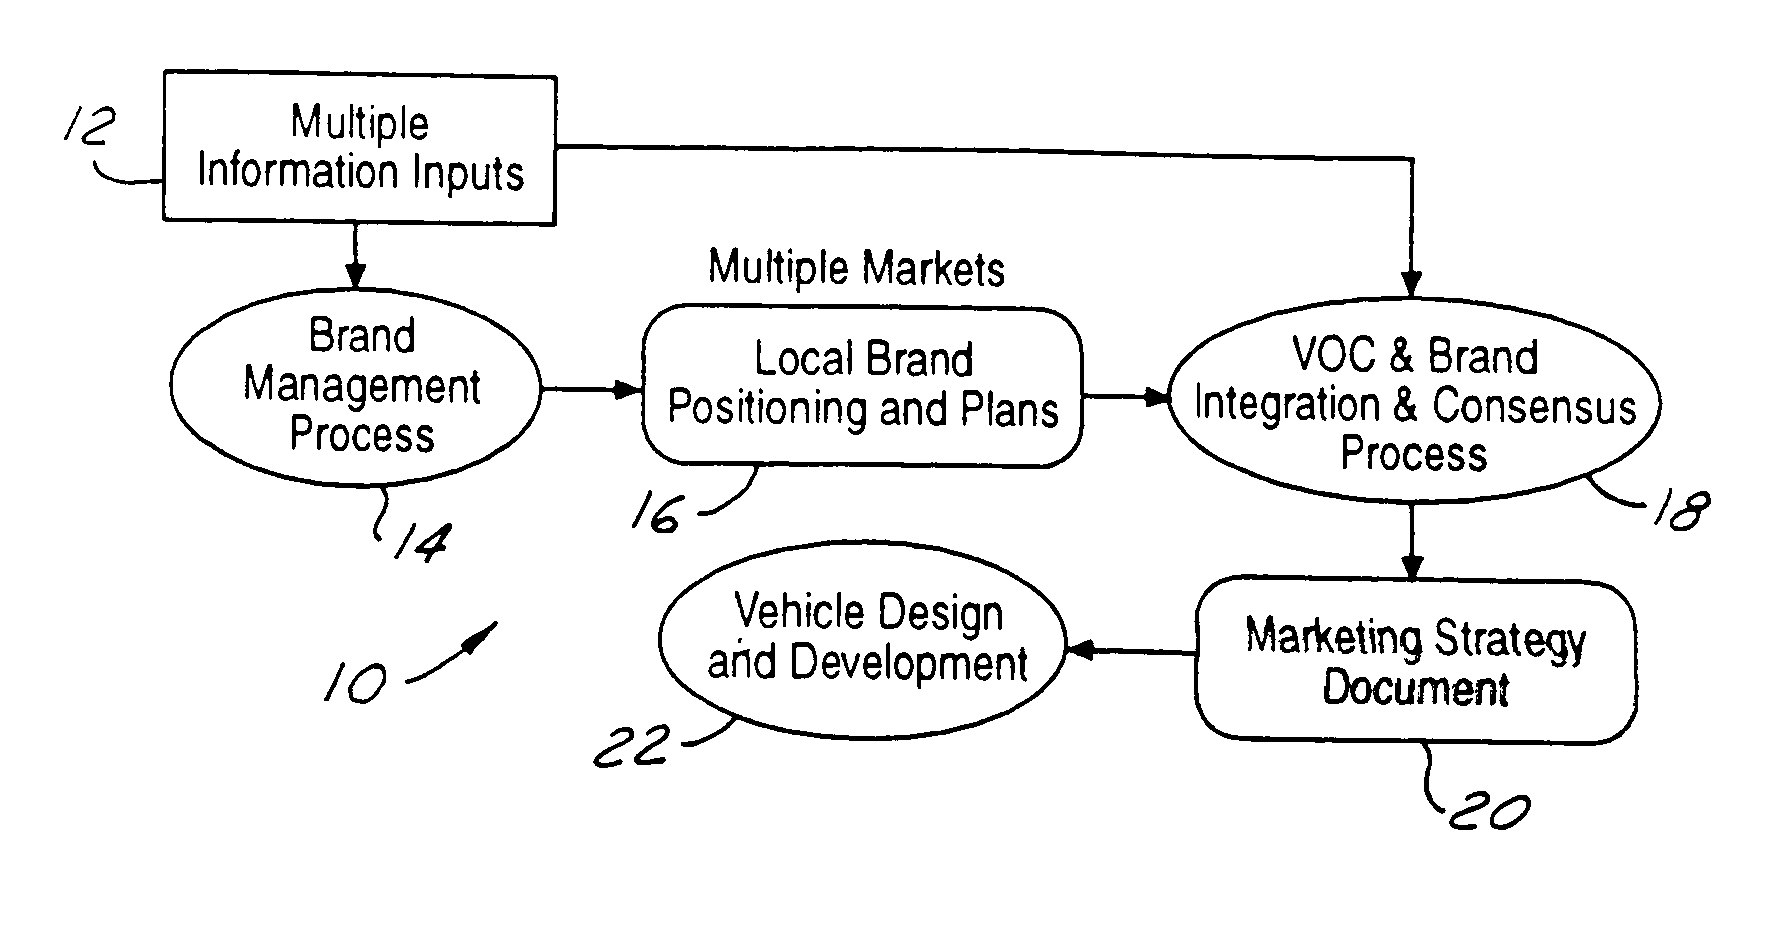 Method of profiling new vehicles and improvements